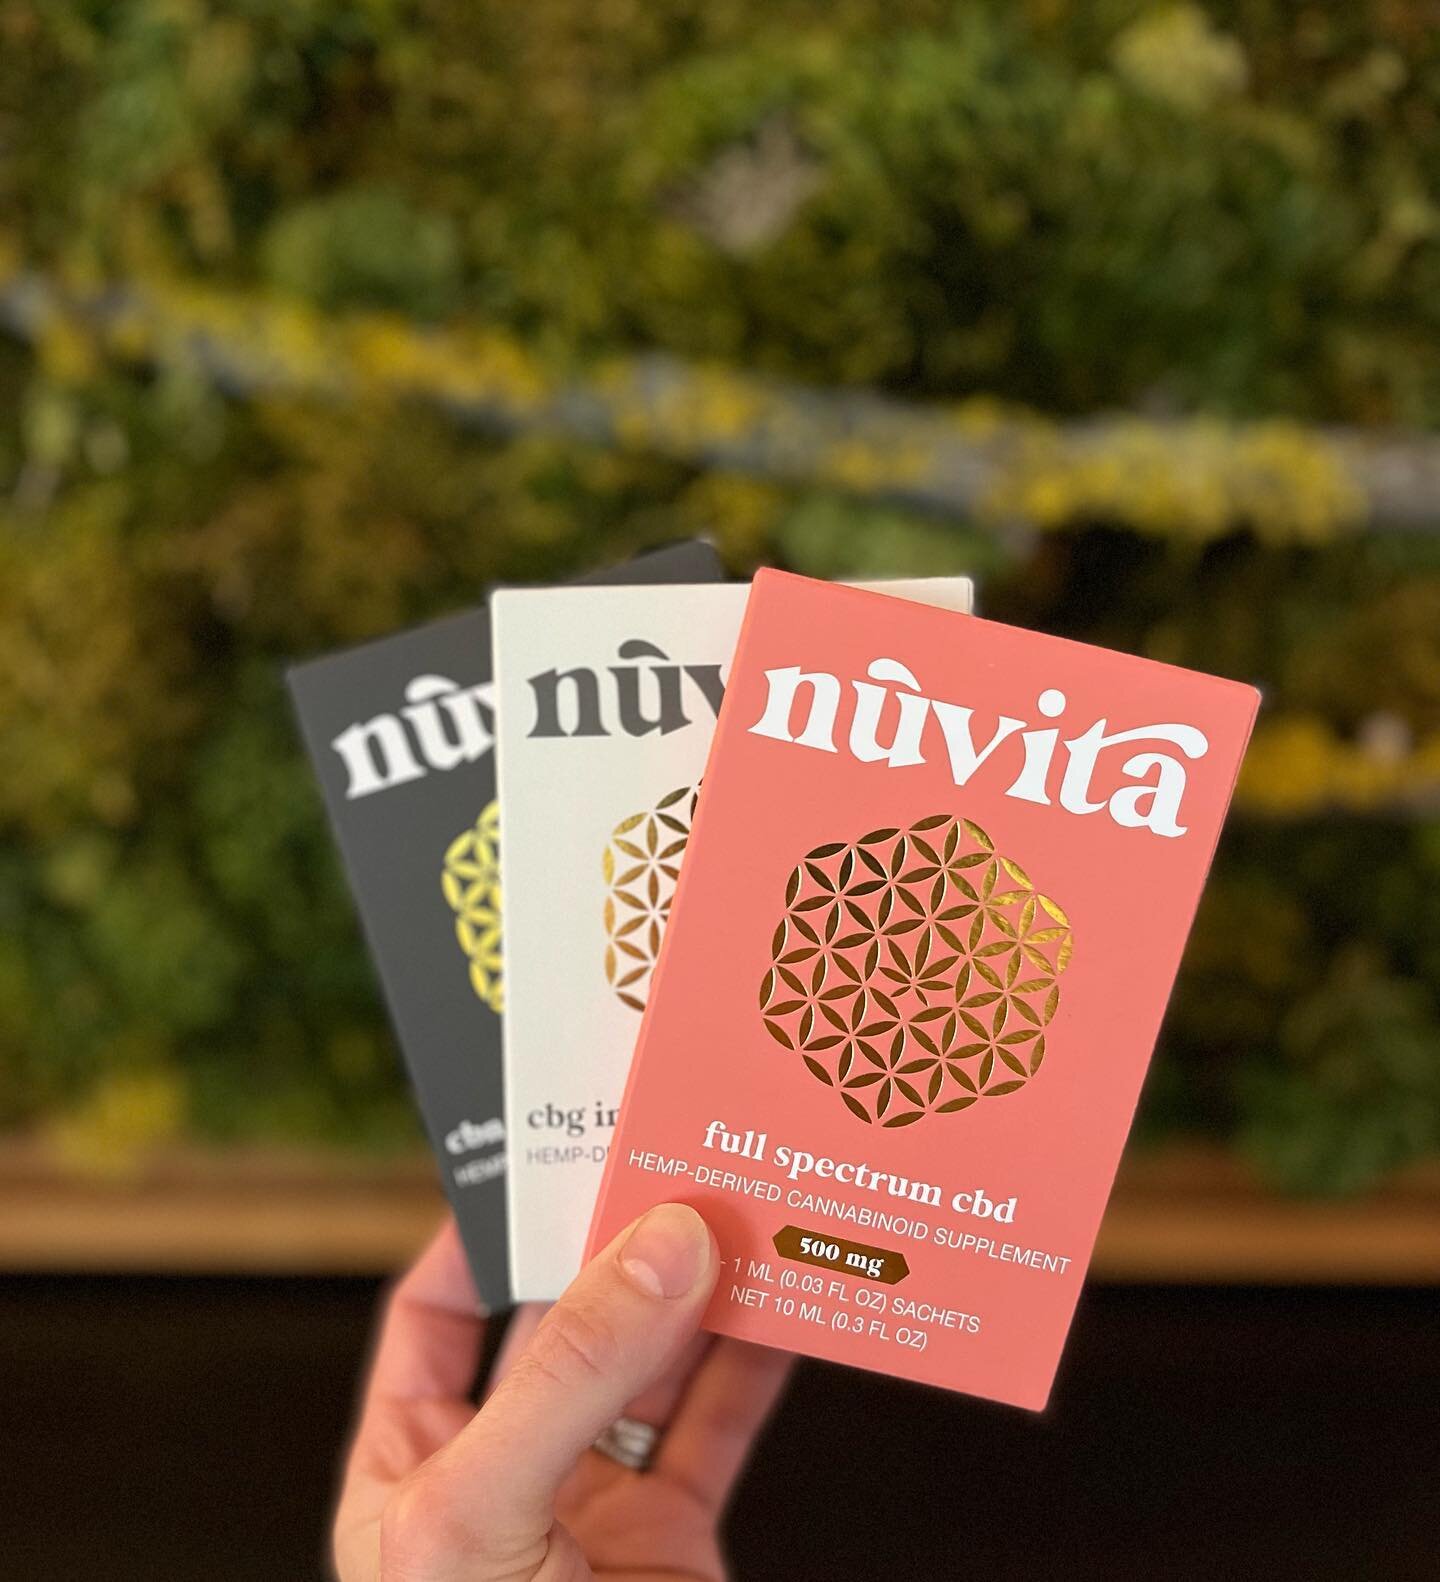 Curious about Nuvita CBD? I&rsquo;ve got samples of the full sprectrum CBD, CBG and CBN! DM if you&rsquo;d like to try one of them out. 🌱

✨100% Organic
✨Vegan
✨Gluten free
✨US grown and manufactured 
✨Certificate of analysis 
✨Glyphosate free
✨Non-